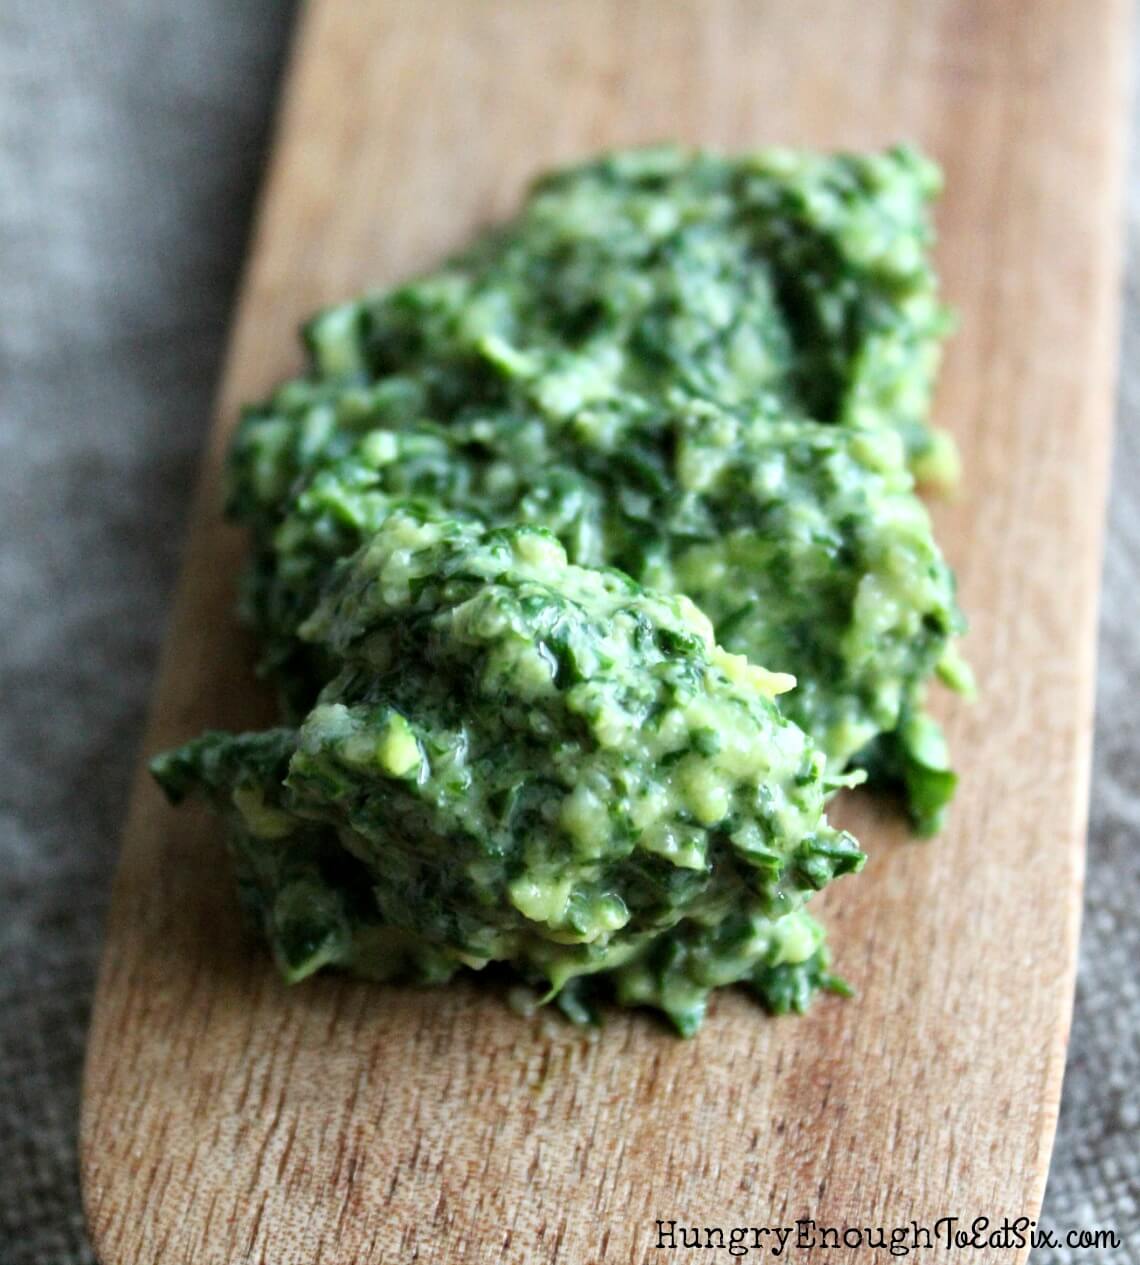 Pesto Crisps have a toasted crunch and a flavor mellowed and melded by baking.